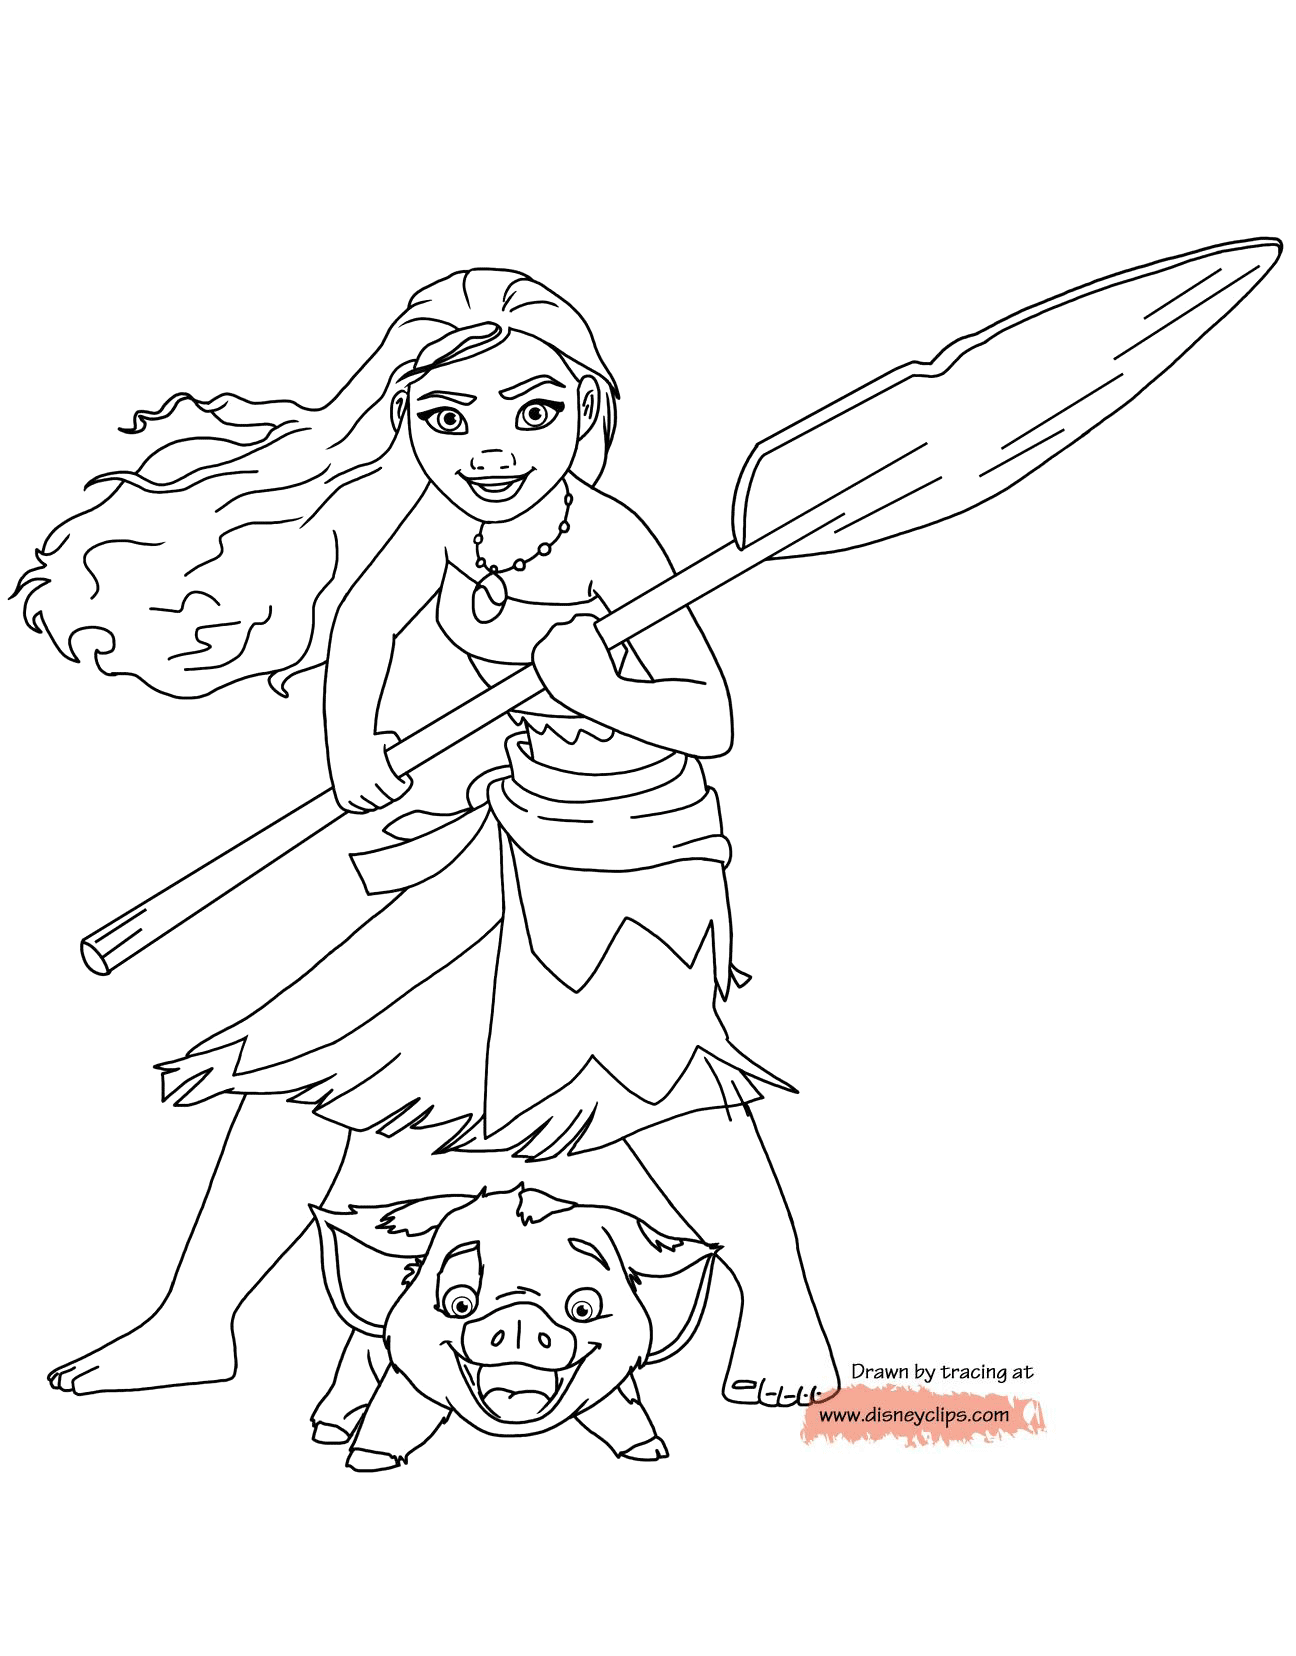 Disney S Moana Coloring Pages Disneyclips Com